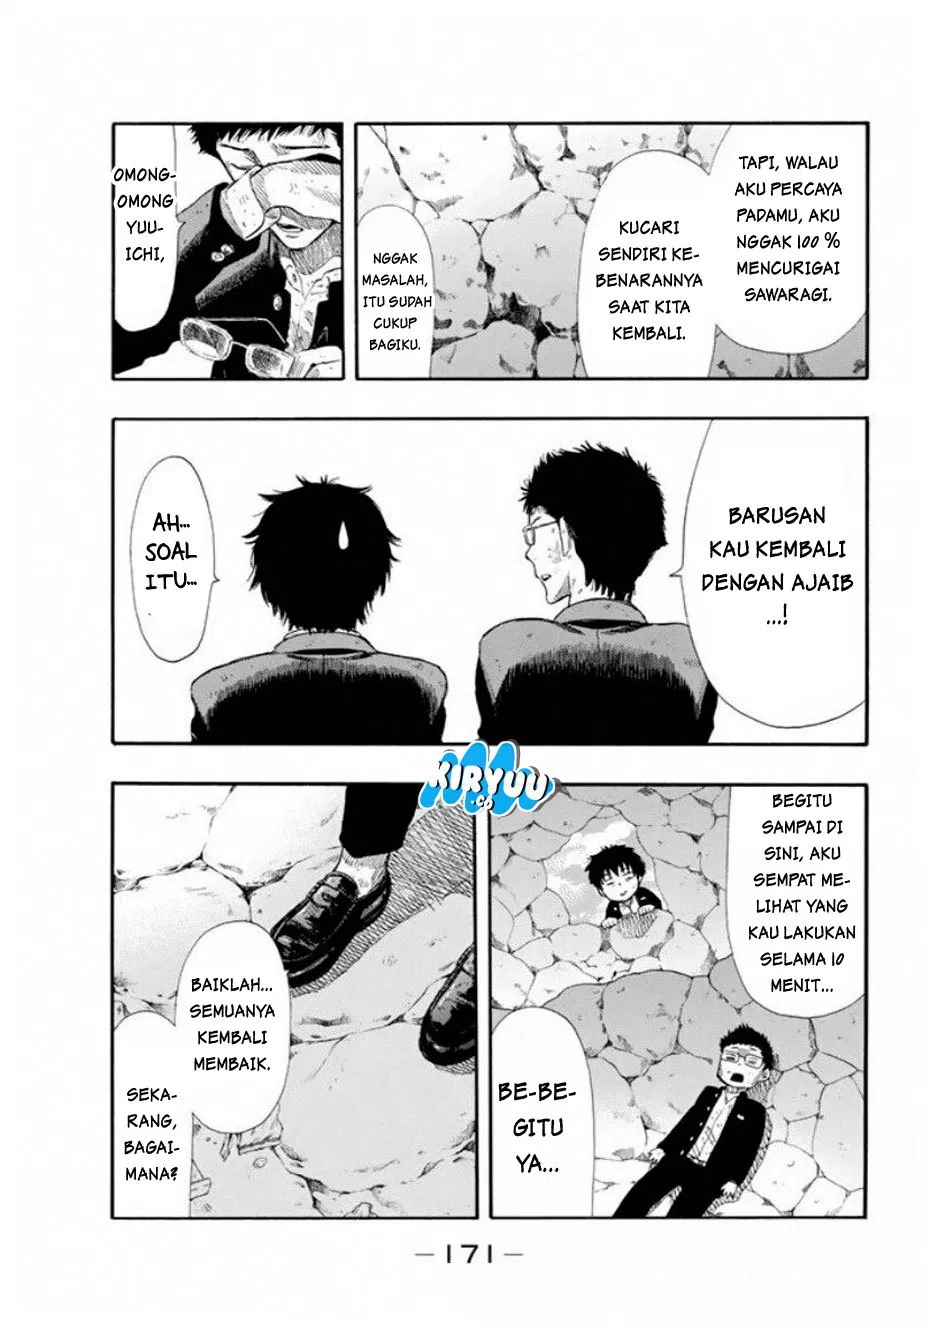 Tomodachi Game Chapter 17